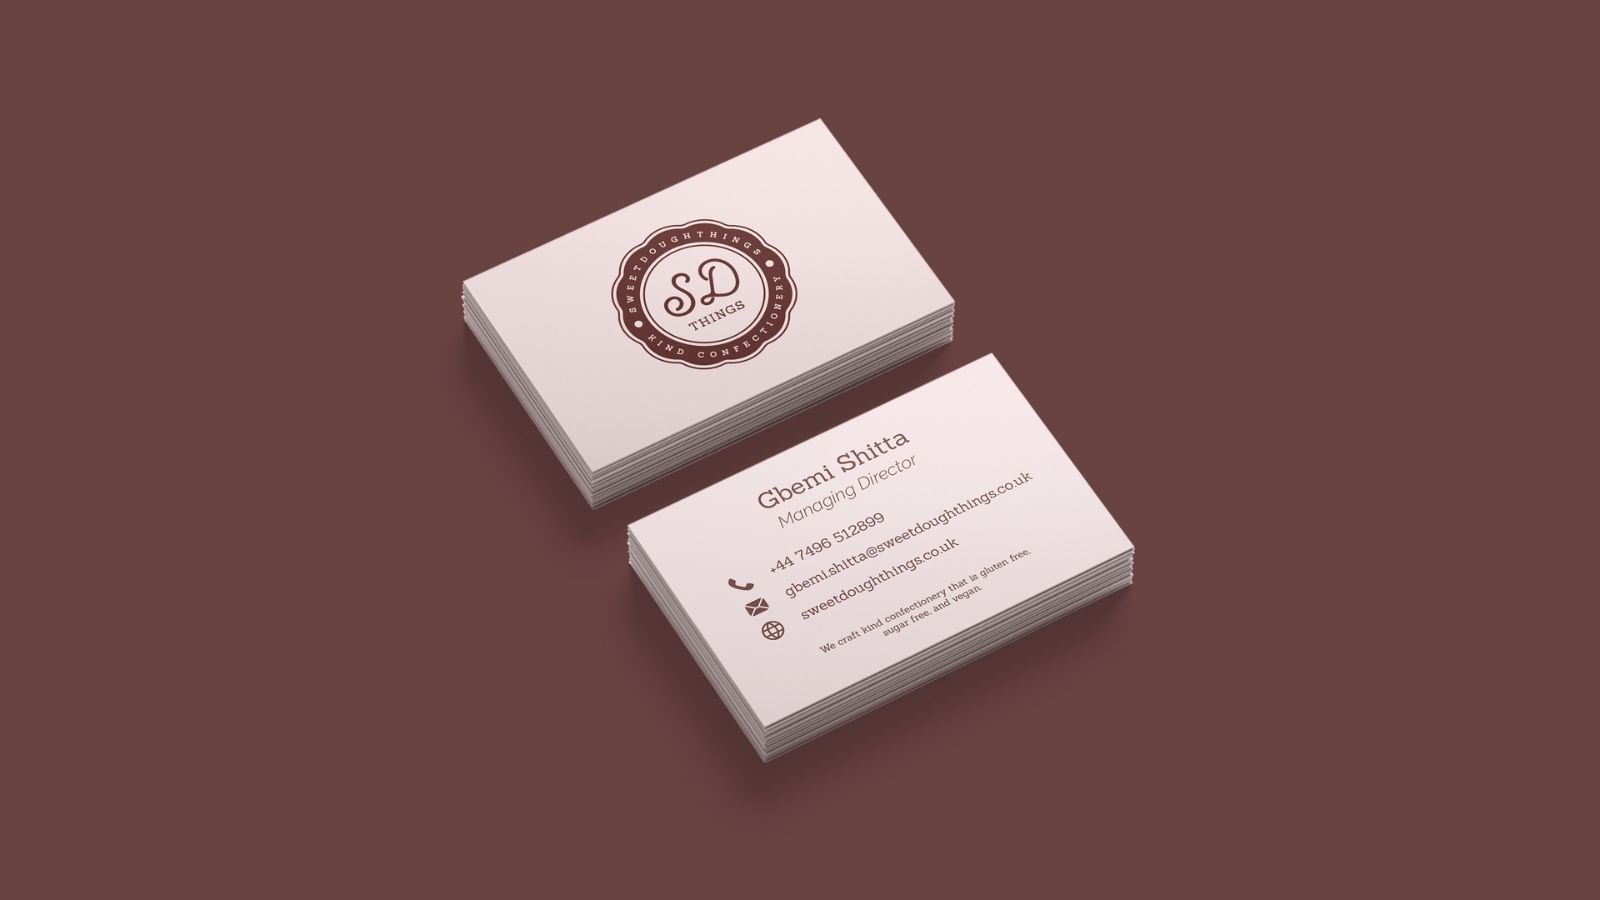 Sweet dough things business cards